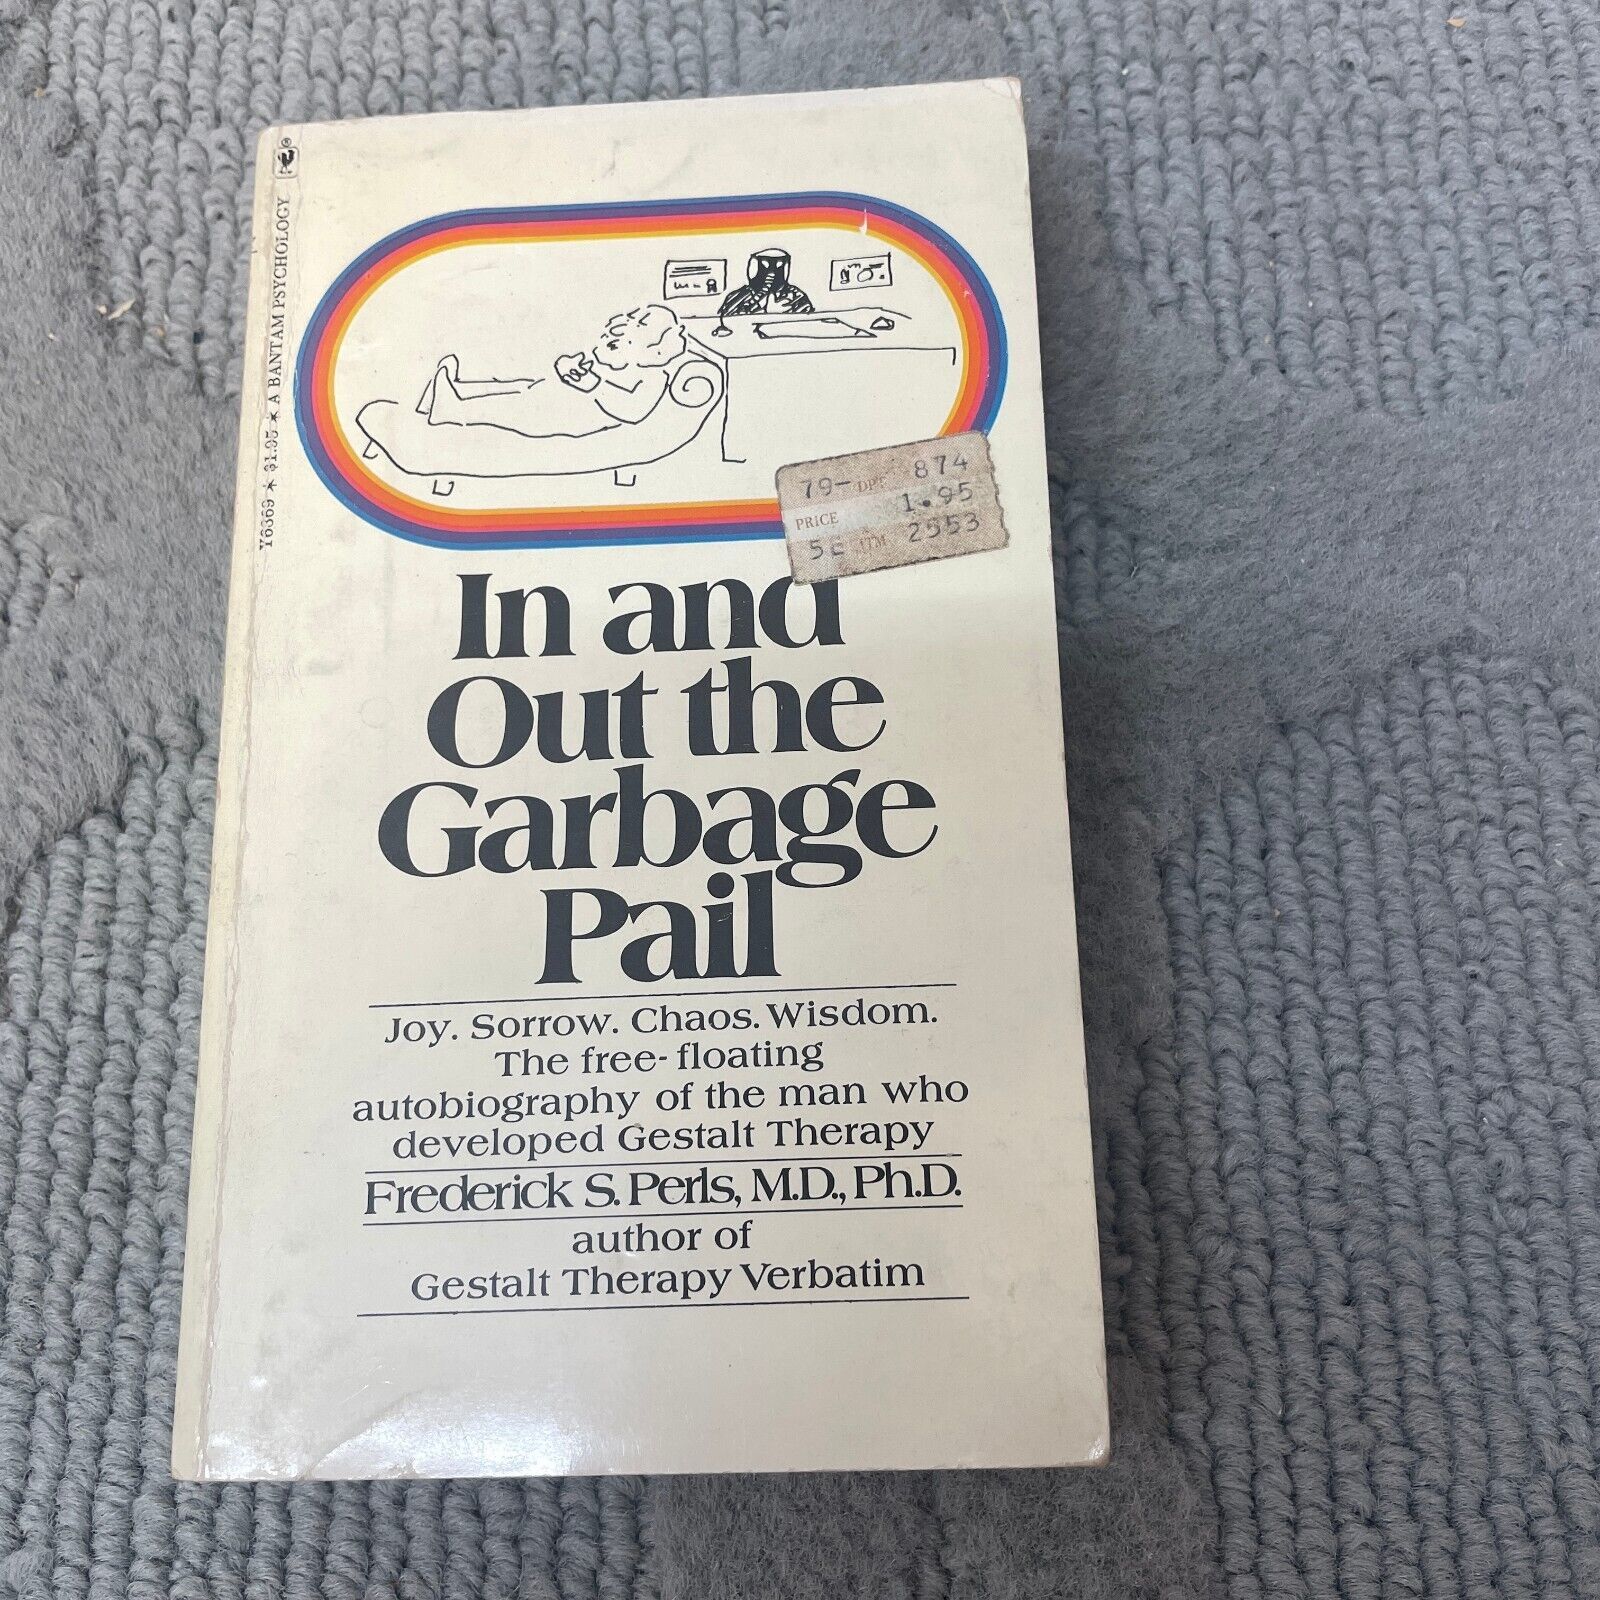 Primary image for In And Out Garbage Pail Psychology Paperback Book by Frederick S. Perls 1972